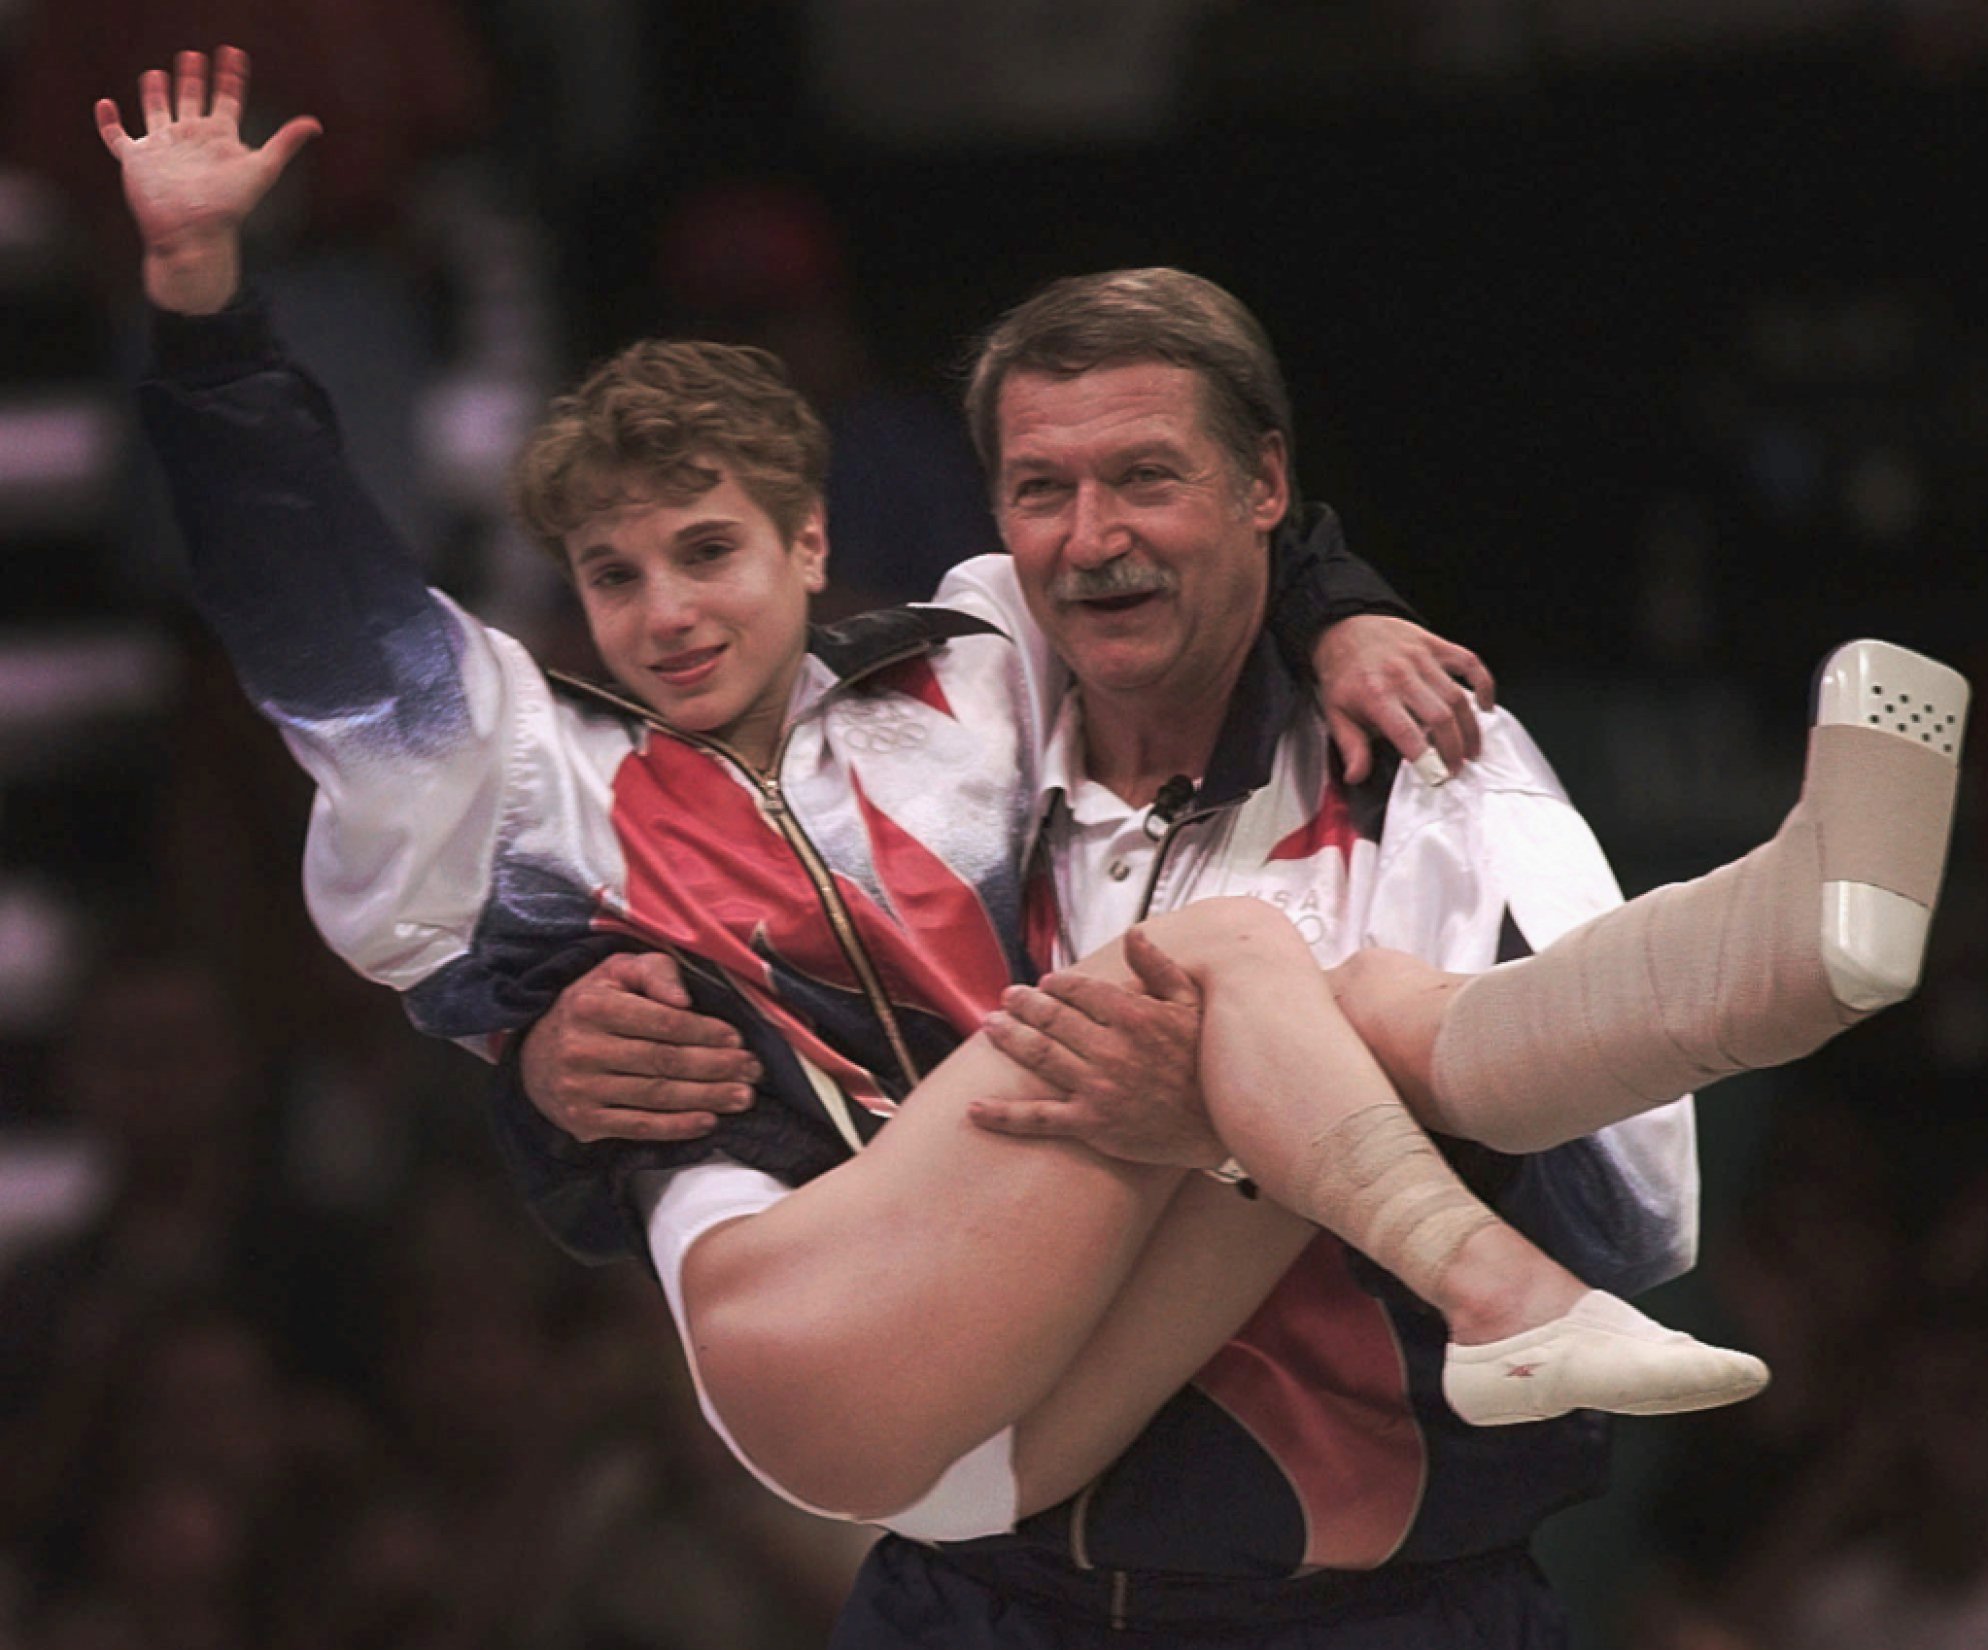 USA's Kerri Strug is carried by her coach, Bela Karolyi, as she waves to the crowd on her way to receiving her gold medal for the women's team gymnastics competition, at the Centennial Summer Olympic Games in Atlanta on Tuesday, July 23, 1996. Strug suffered two torn ligaments and a sprained ankle from the vault competition.